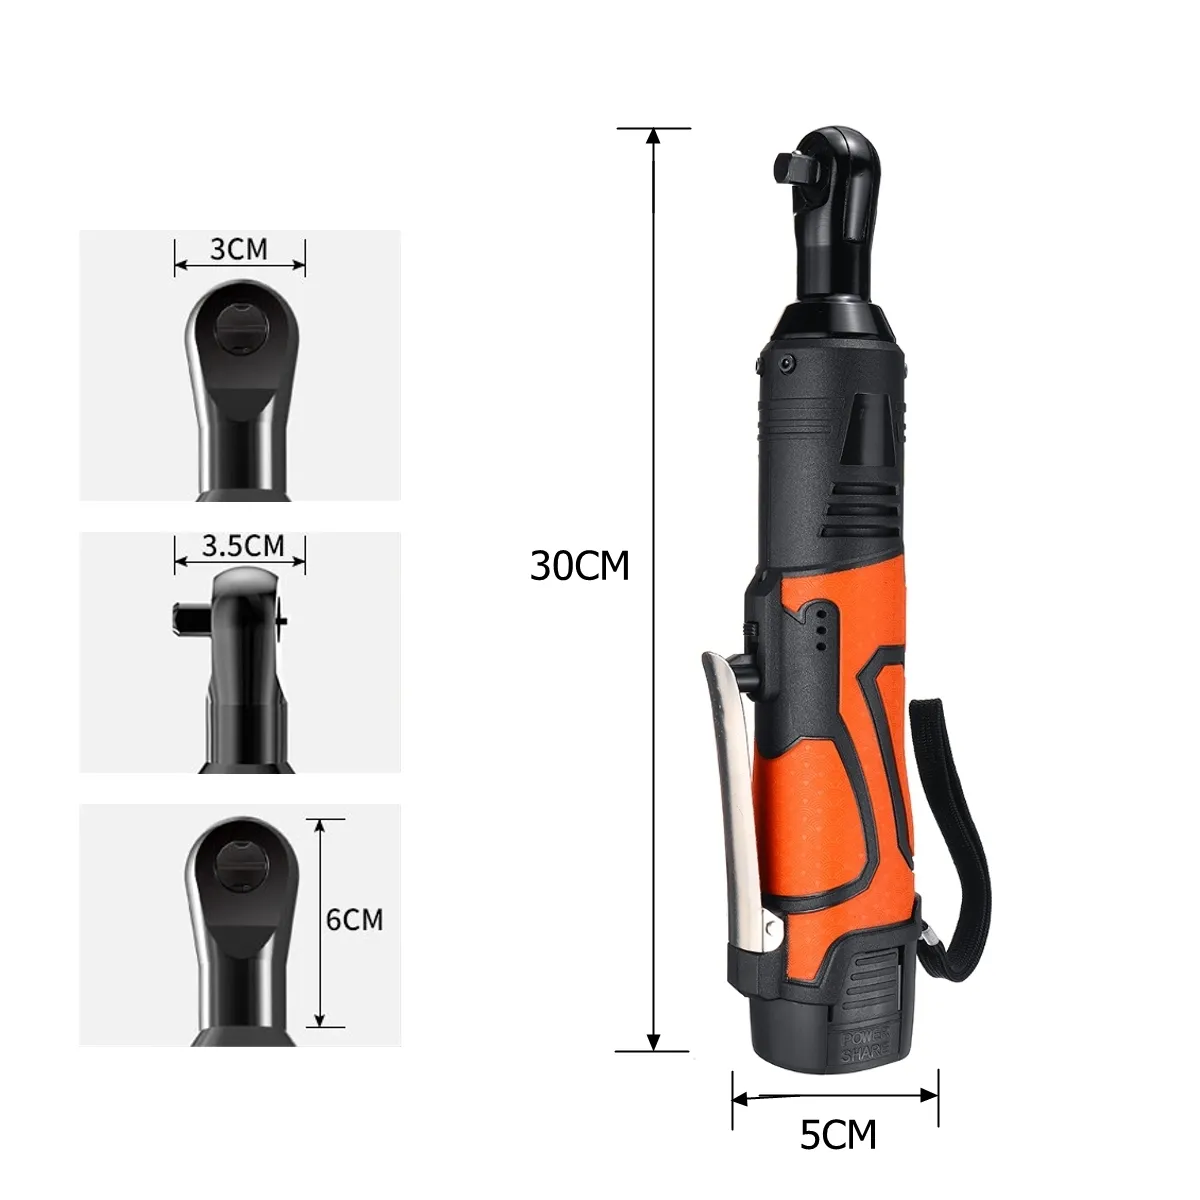 Portable 18V Cordless Electric Wrench 38039039 60Nm Rechargeable Ratchet 90 degree Right Angle Wrench Power tools Set Y2006234589